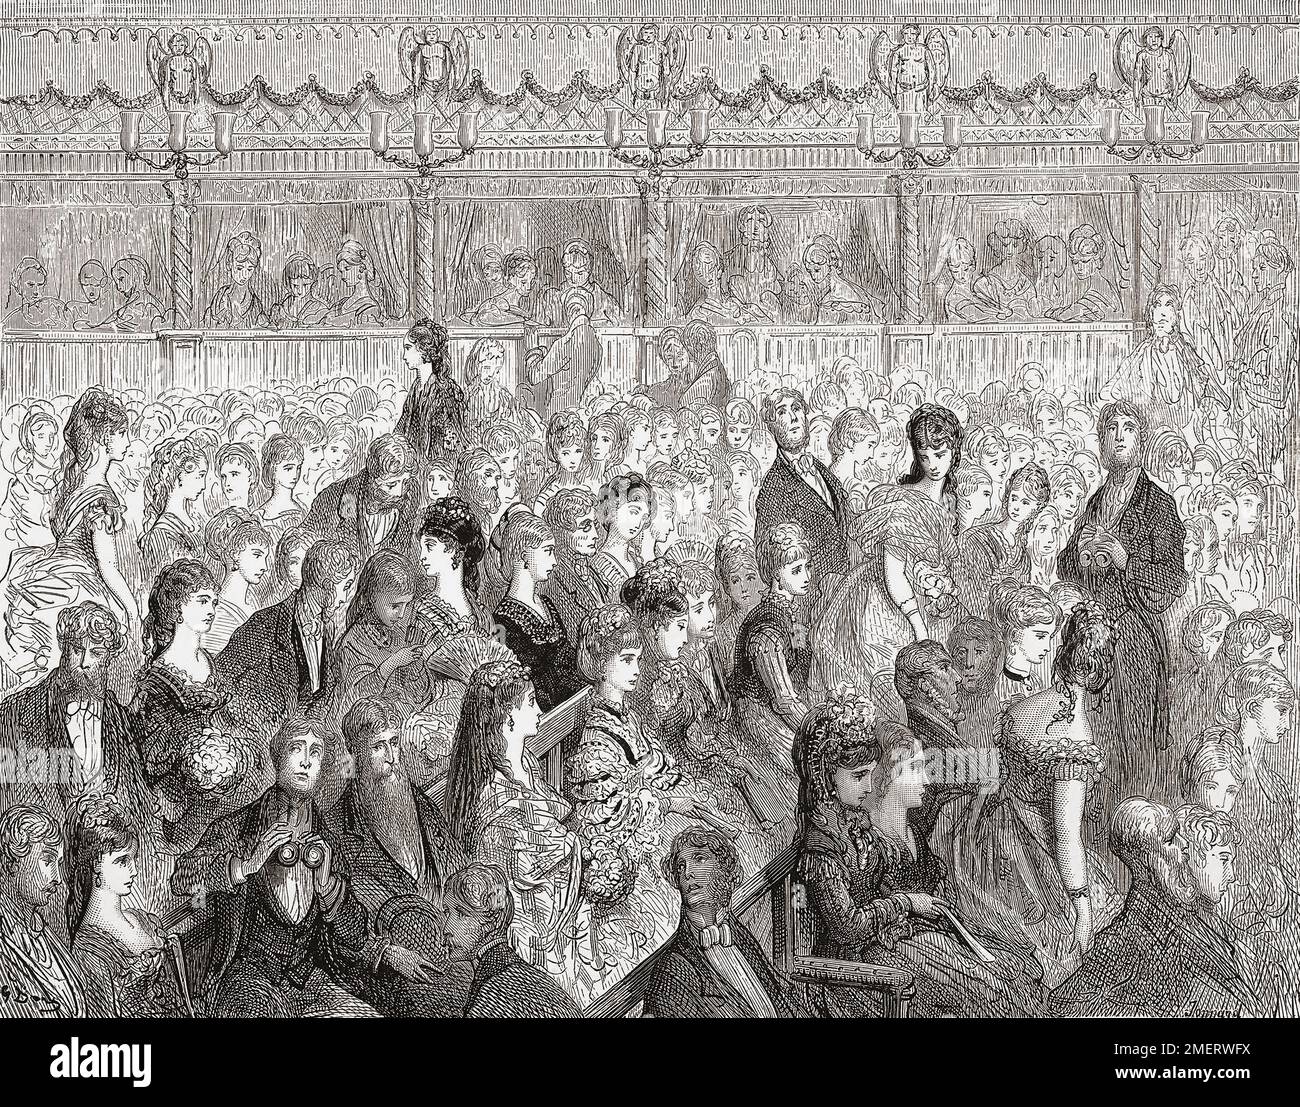 Fashionable audience in the stalls of the Royal Opera House, Covent Garden London in the 19th century. After an illustration by Gustave Doré in the 1890 American edition of London: A Pilgrimage written by Blanchard Jerrold and illustrated by Gustave Doré. Stock Photo